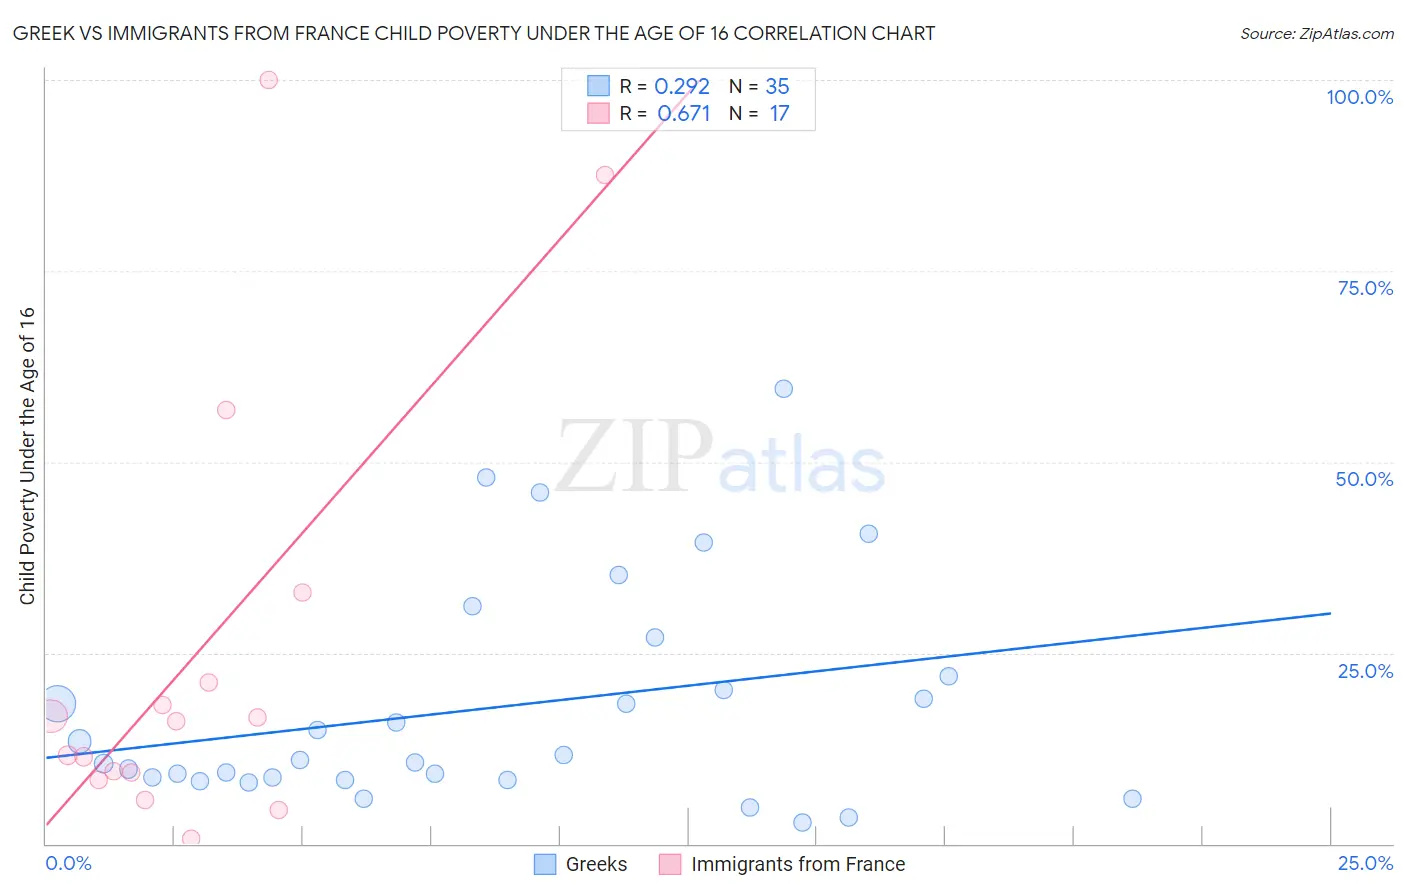 Greek vs Immigrants from France Child Poverty Under the Age of 16